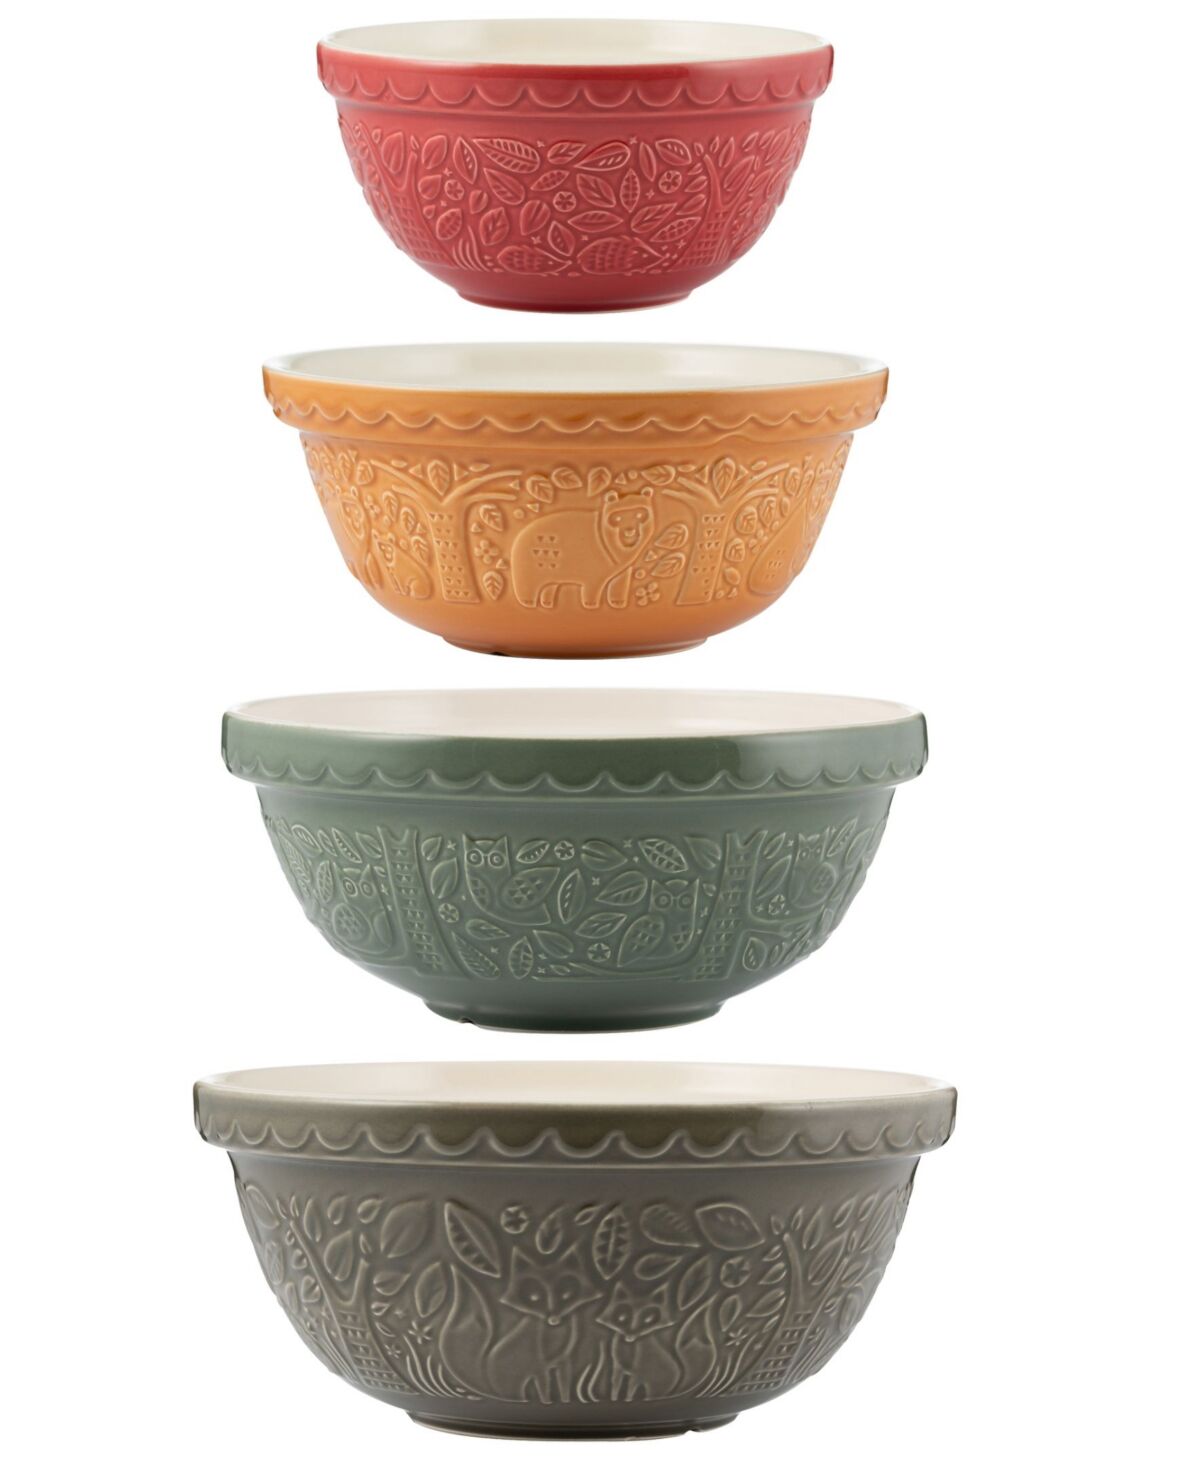 Mason Cash In the Forest New Mixing Bowls, Set of 4 - Orange, Green, Stone Red